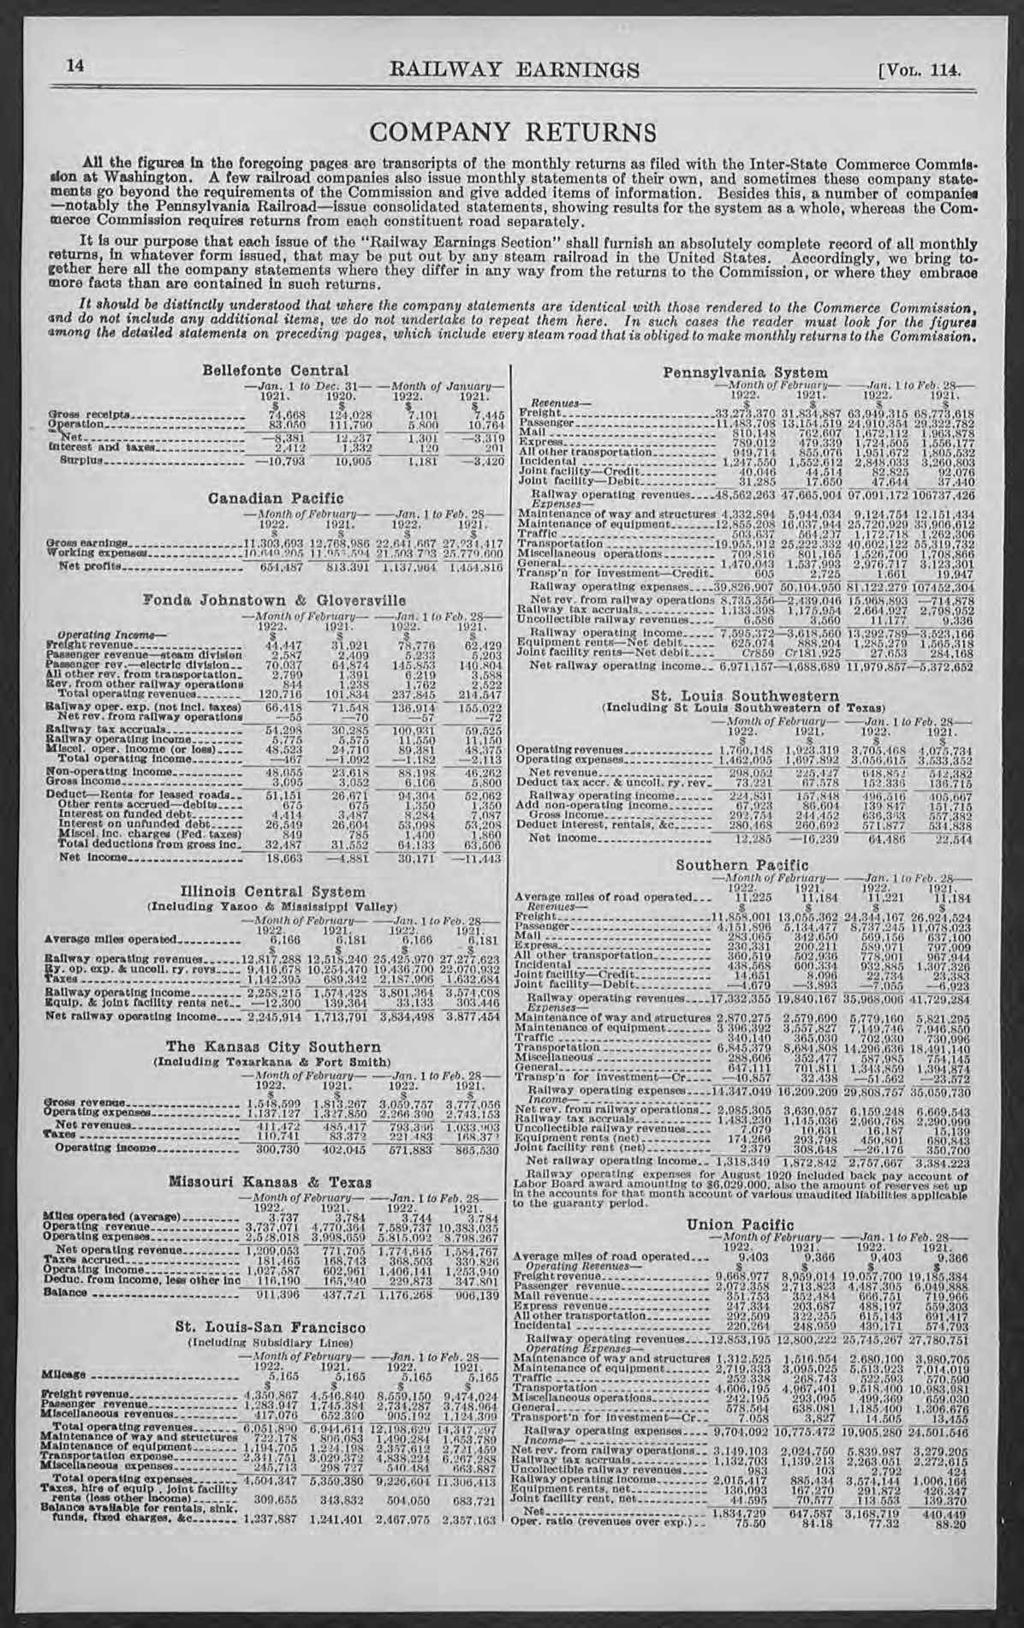 14 RAILWAY EARNINGS [VOL. 114. COMPANY RETURNS All the figures in the foregoing pages are transcripts of the monthly returns as filed with the Inter-State Commerce Commisdon at Washington.